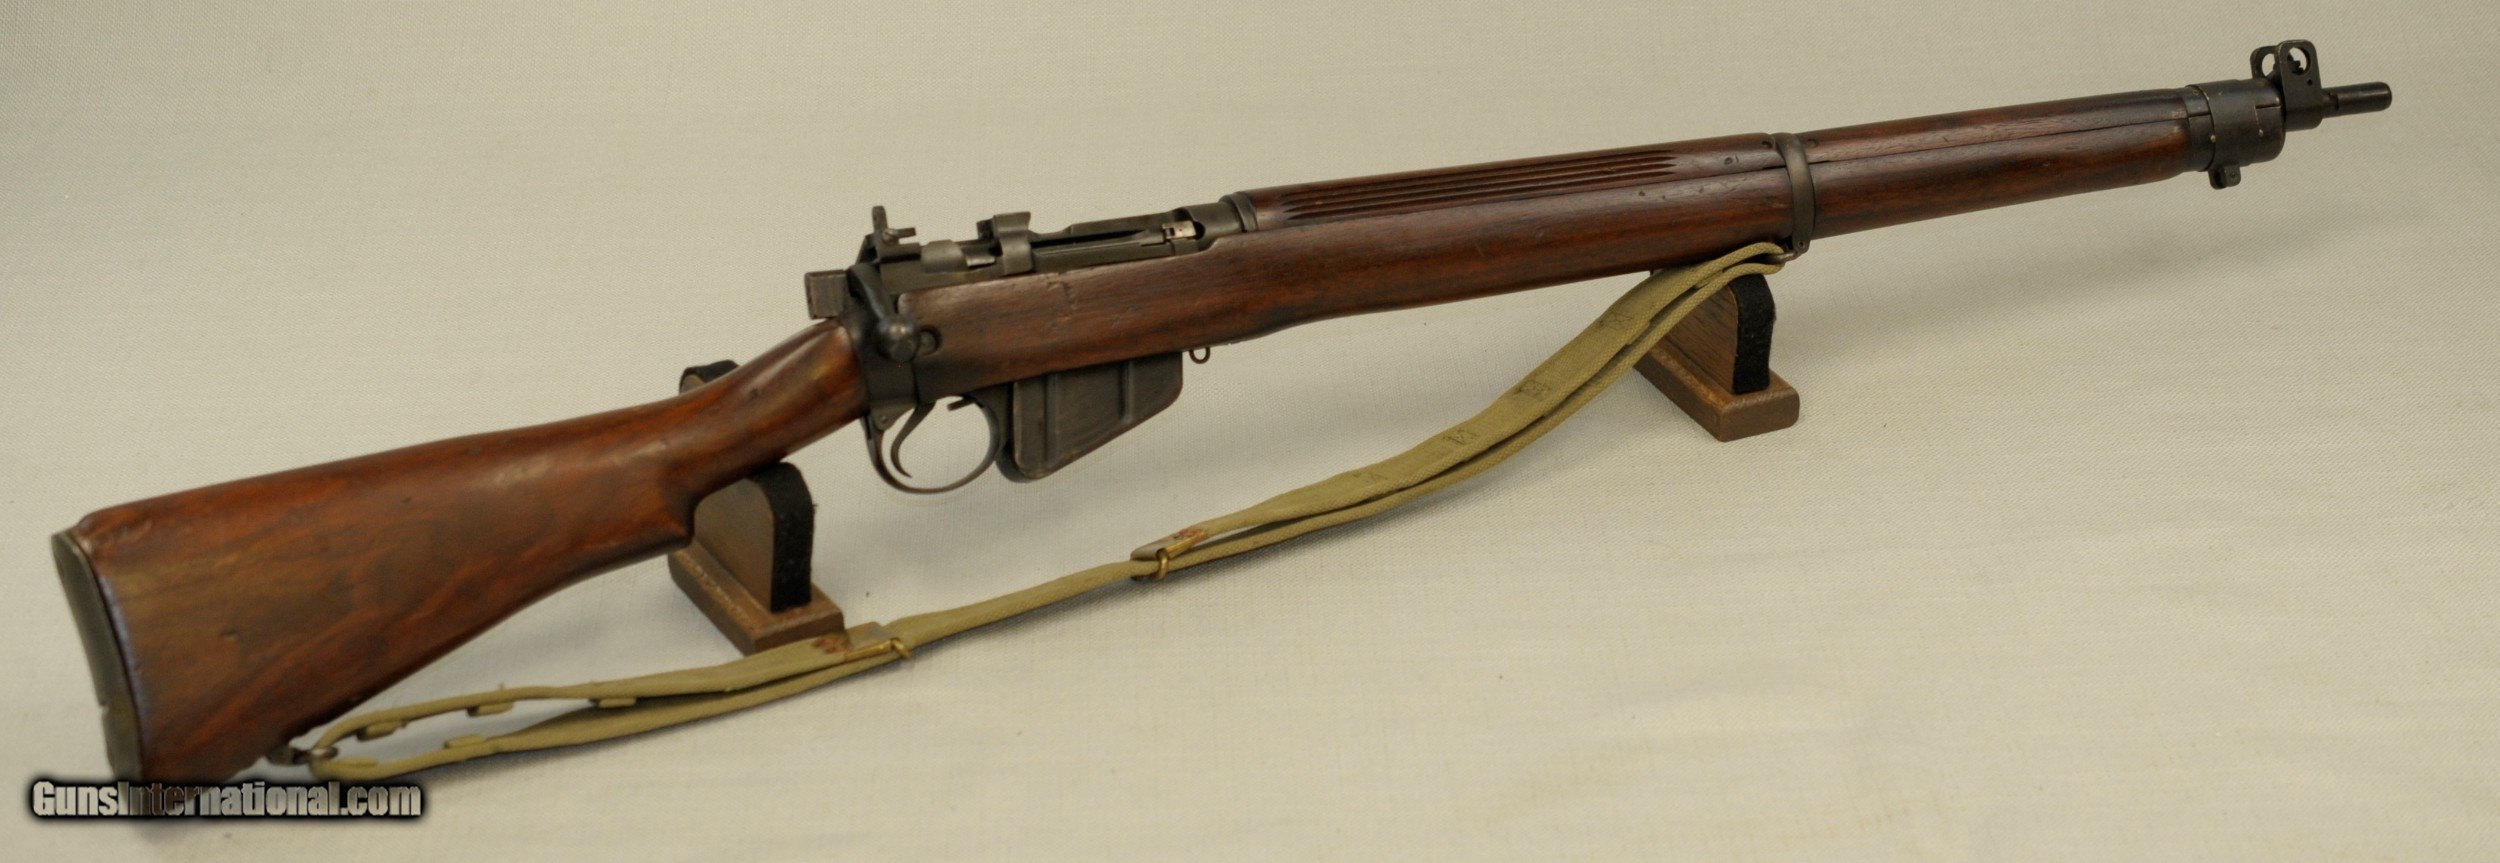 1942 LONG BRANCH ENFIELD NO.4 MK 1 .303 CAL RIFLE in United States